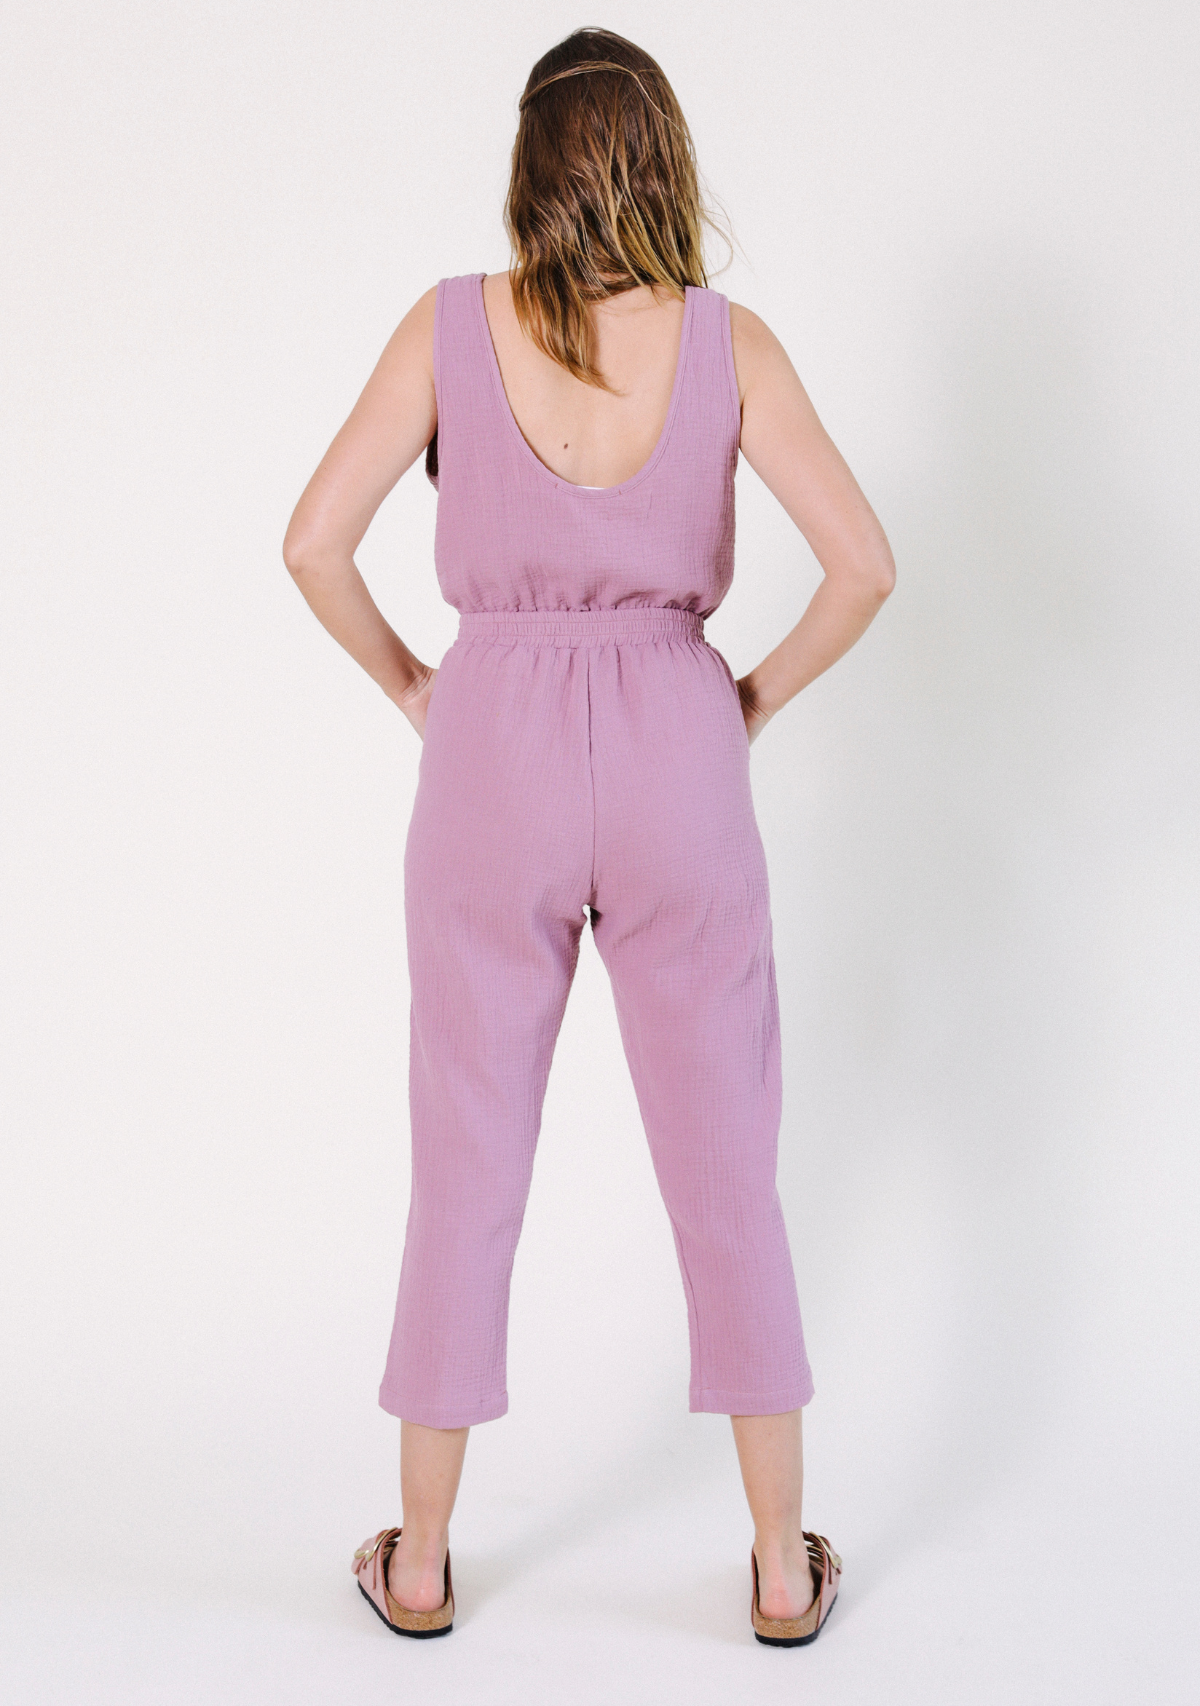 Women's Tank Jumpsuit made from 100% Organic Cotton Gauze Ginger Pink Sizes XS-3X